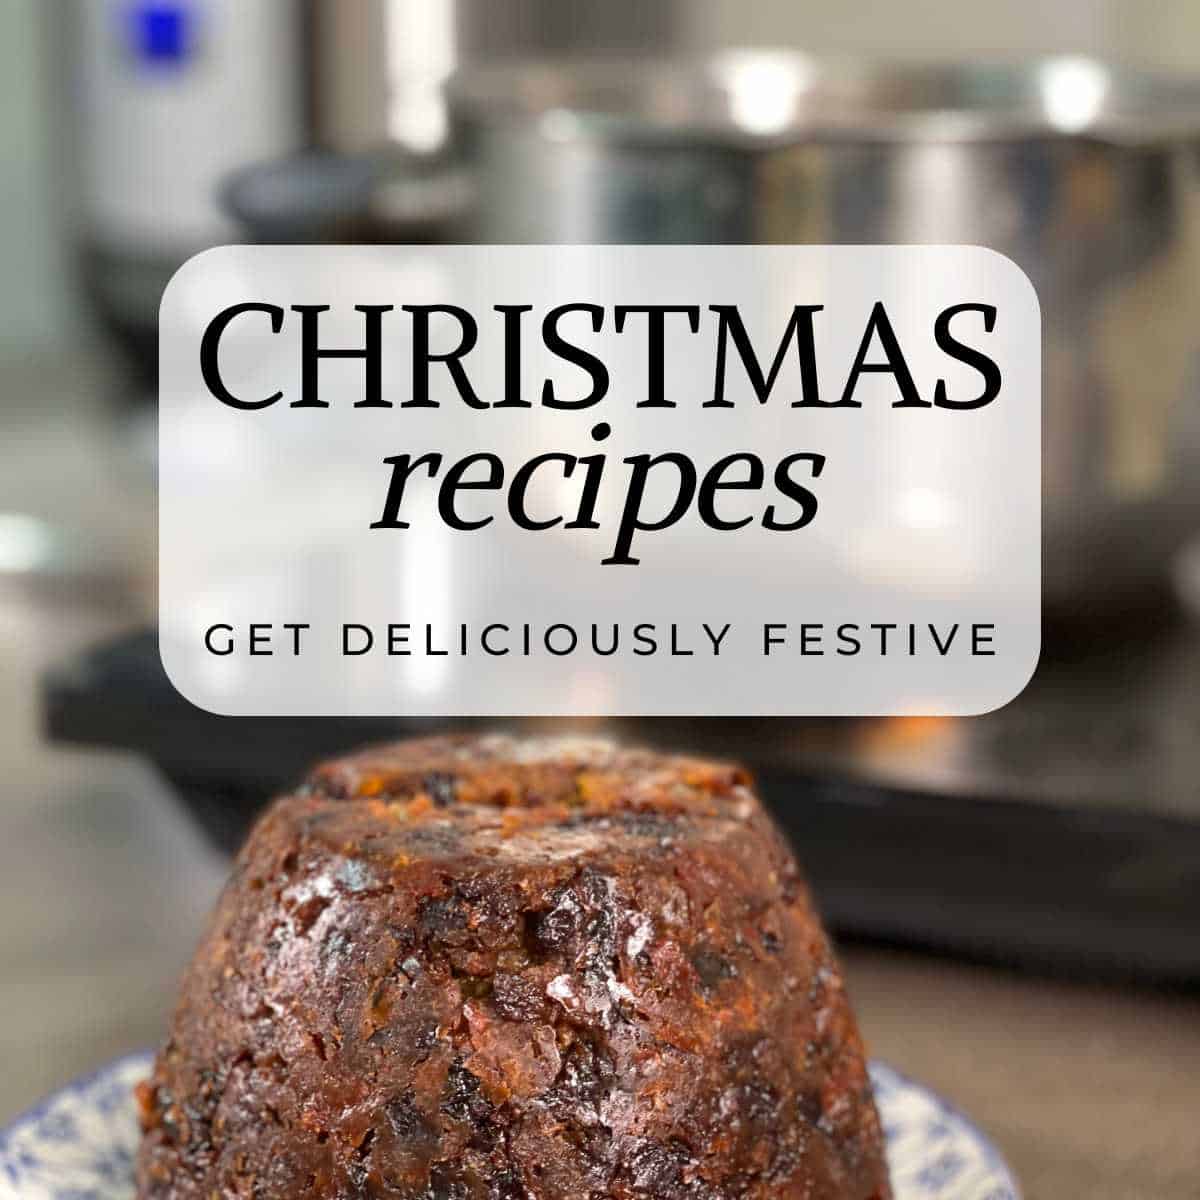 Photo of a pressure cooked Christmas Pudding with the words Christmas recipes, get deliciously festive